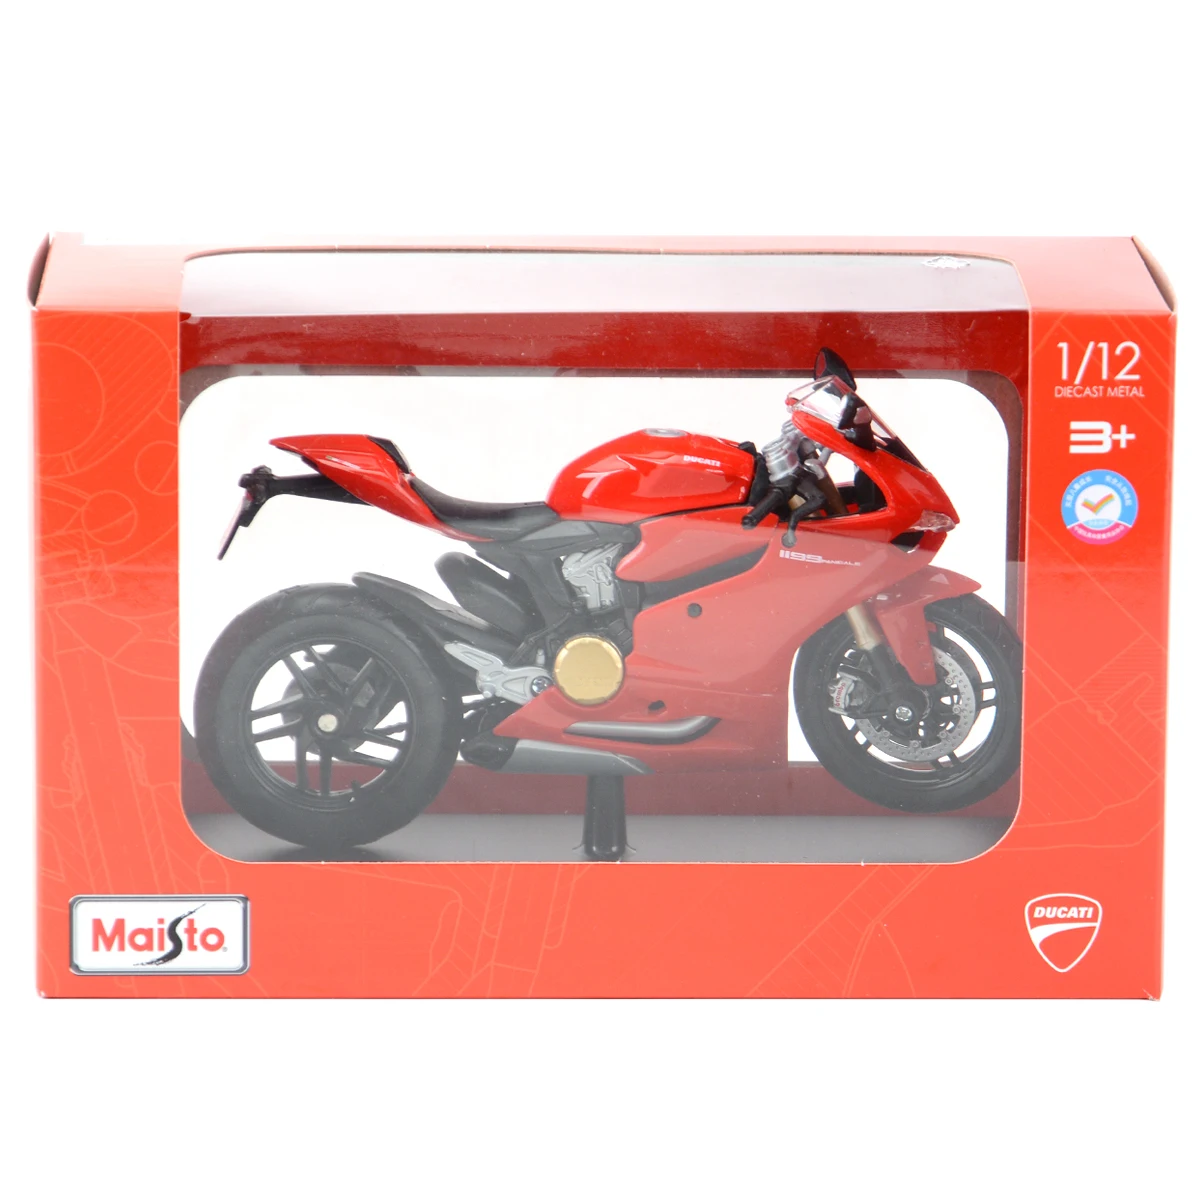 Maisto 1:12 Ducati 1199 Panigale With Stand Die Cast Vehicles Collectible Hobbies Motorcycle Model Toys